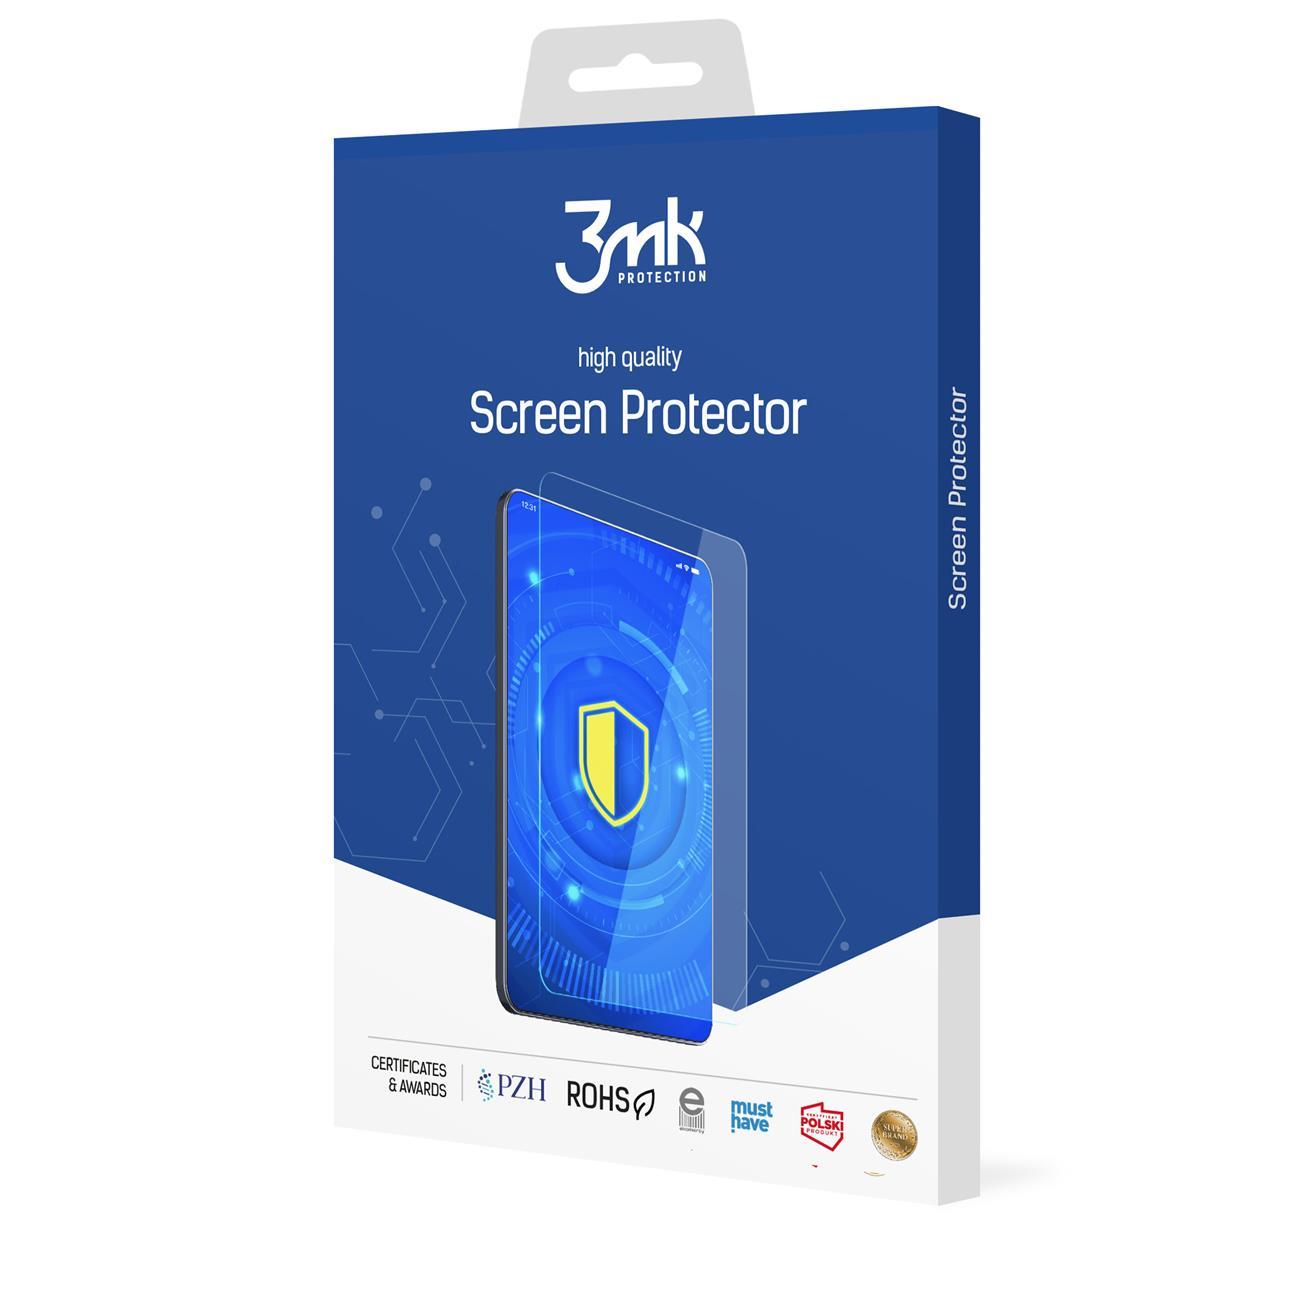 3mk Booster Screen Protector - shipping / transport packaging for cut 3MK All-Safe film.